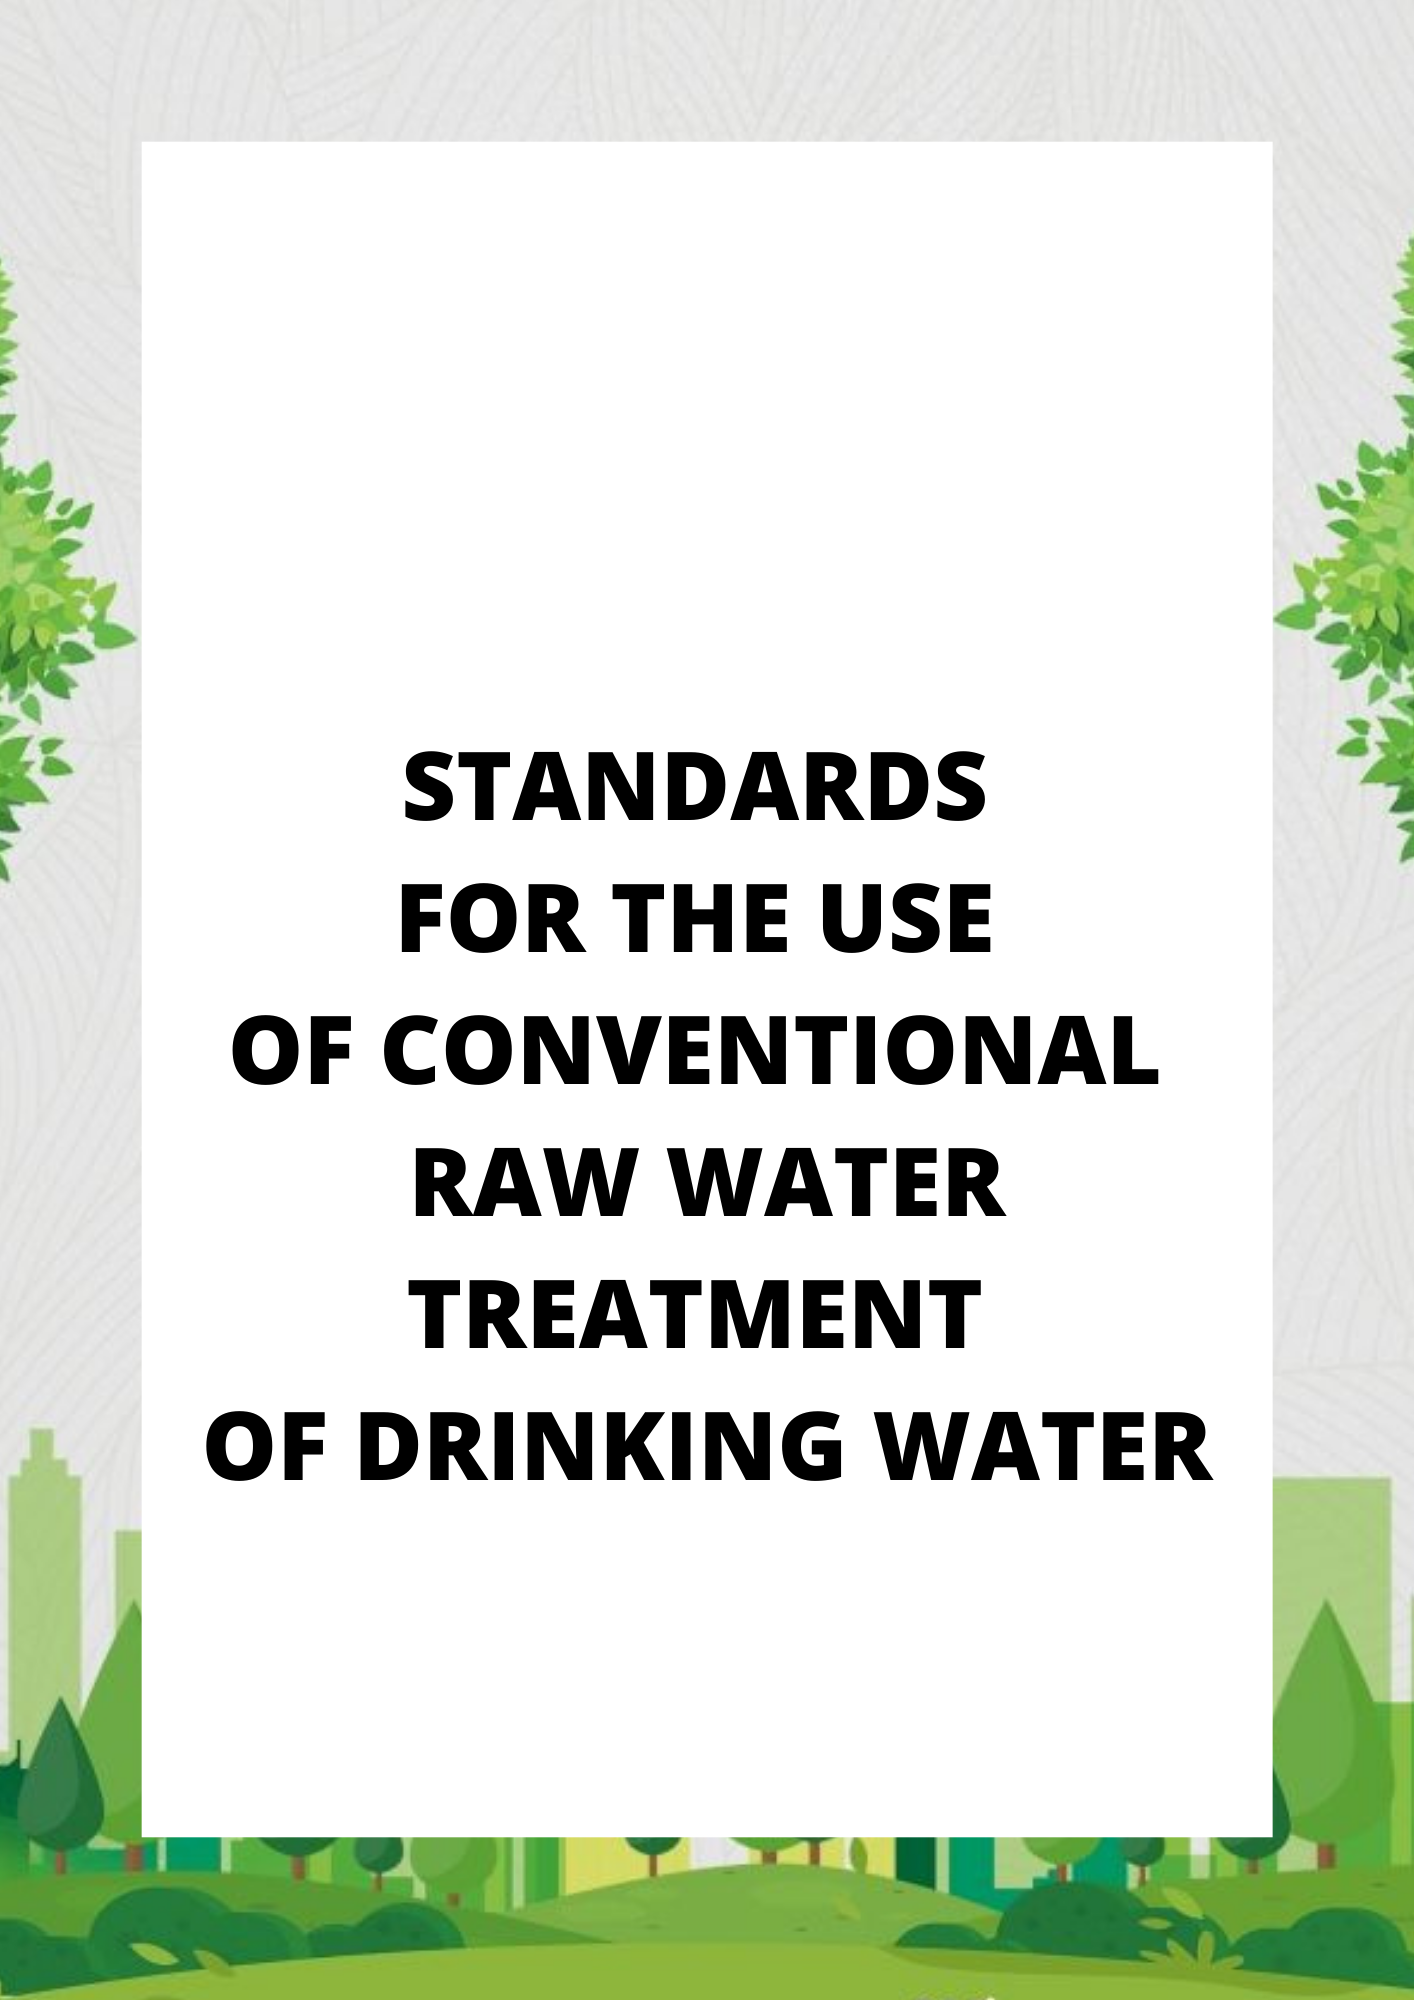 Standards for the Use of Conventional Raw Water Treatment of Drinking Water